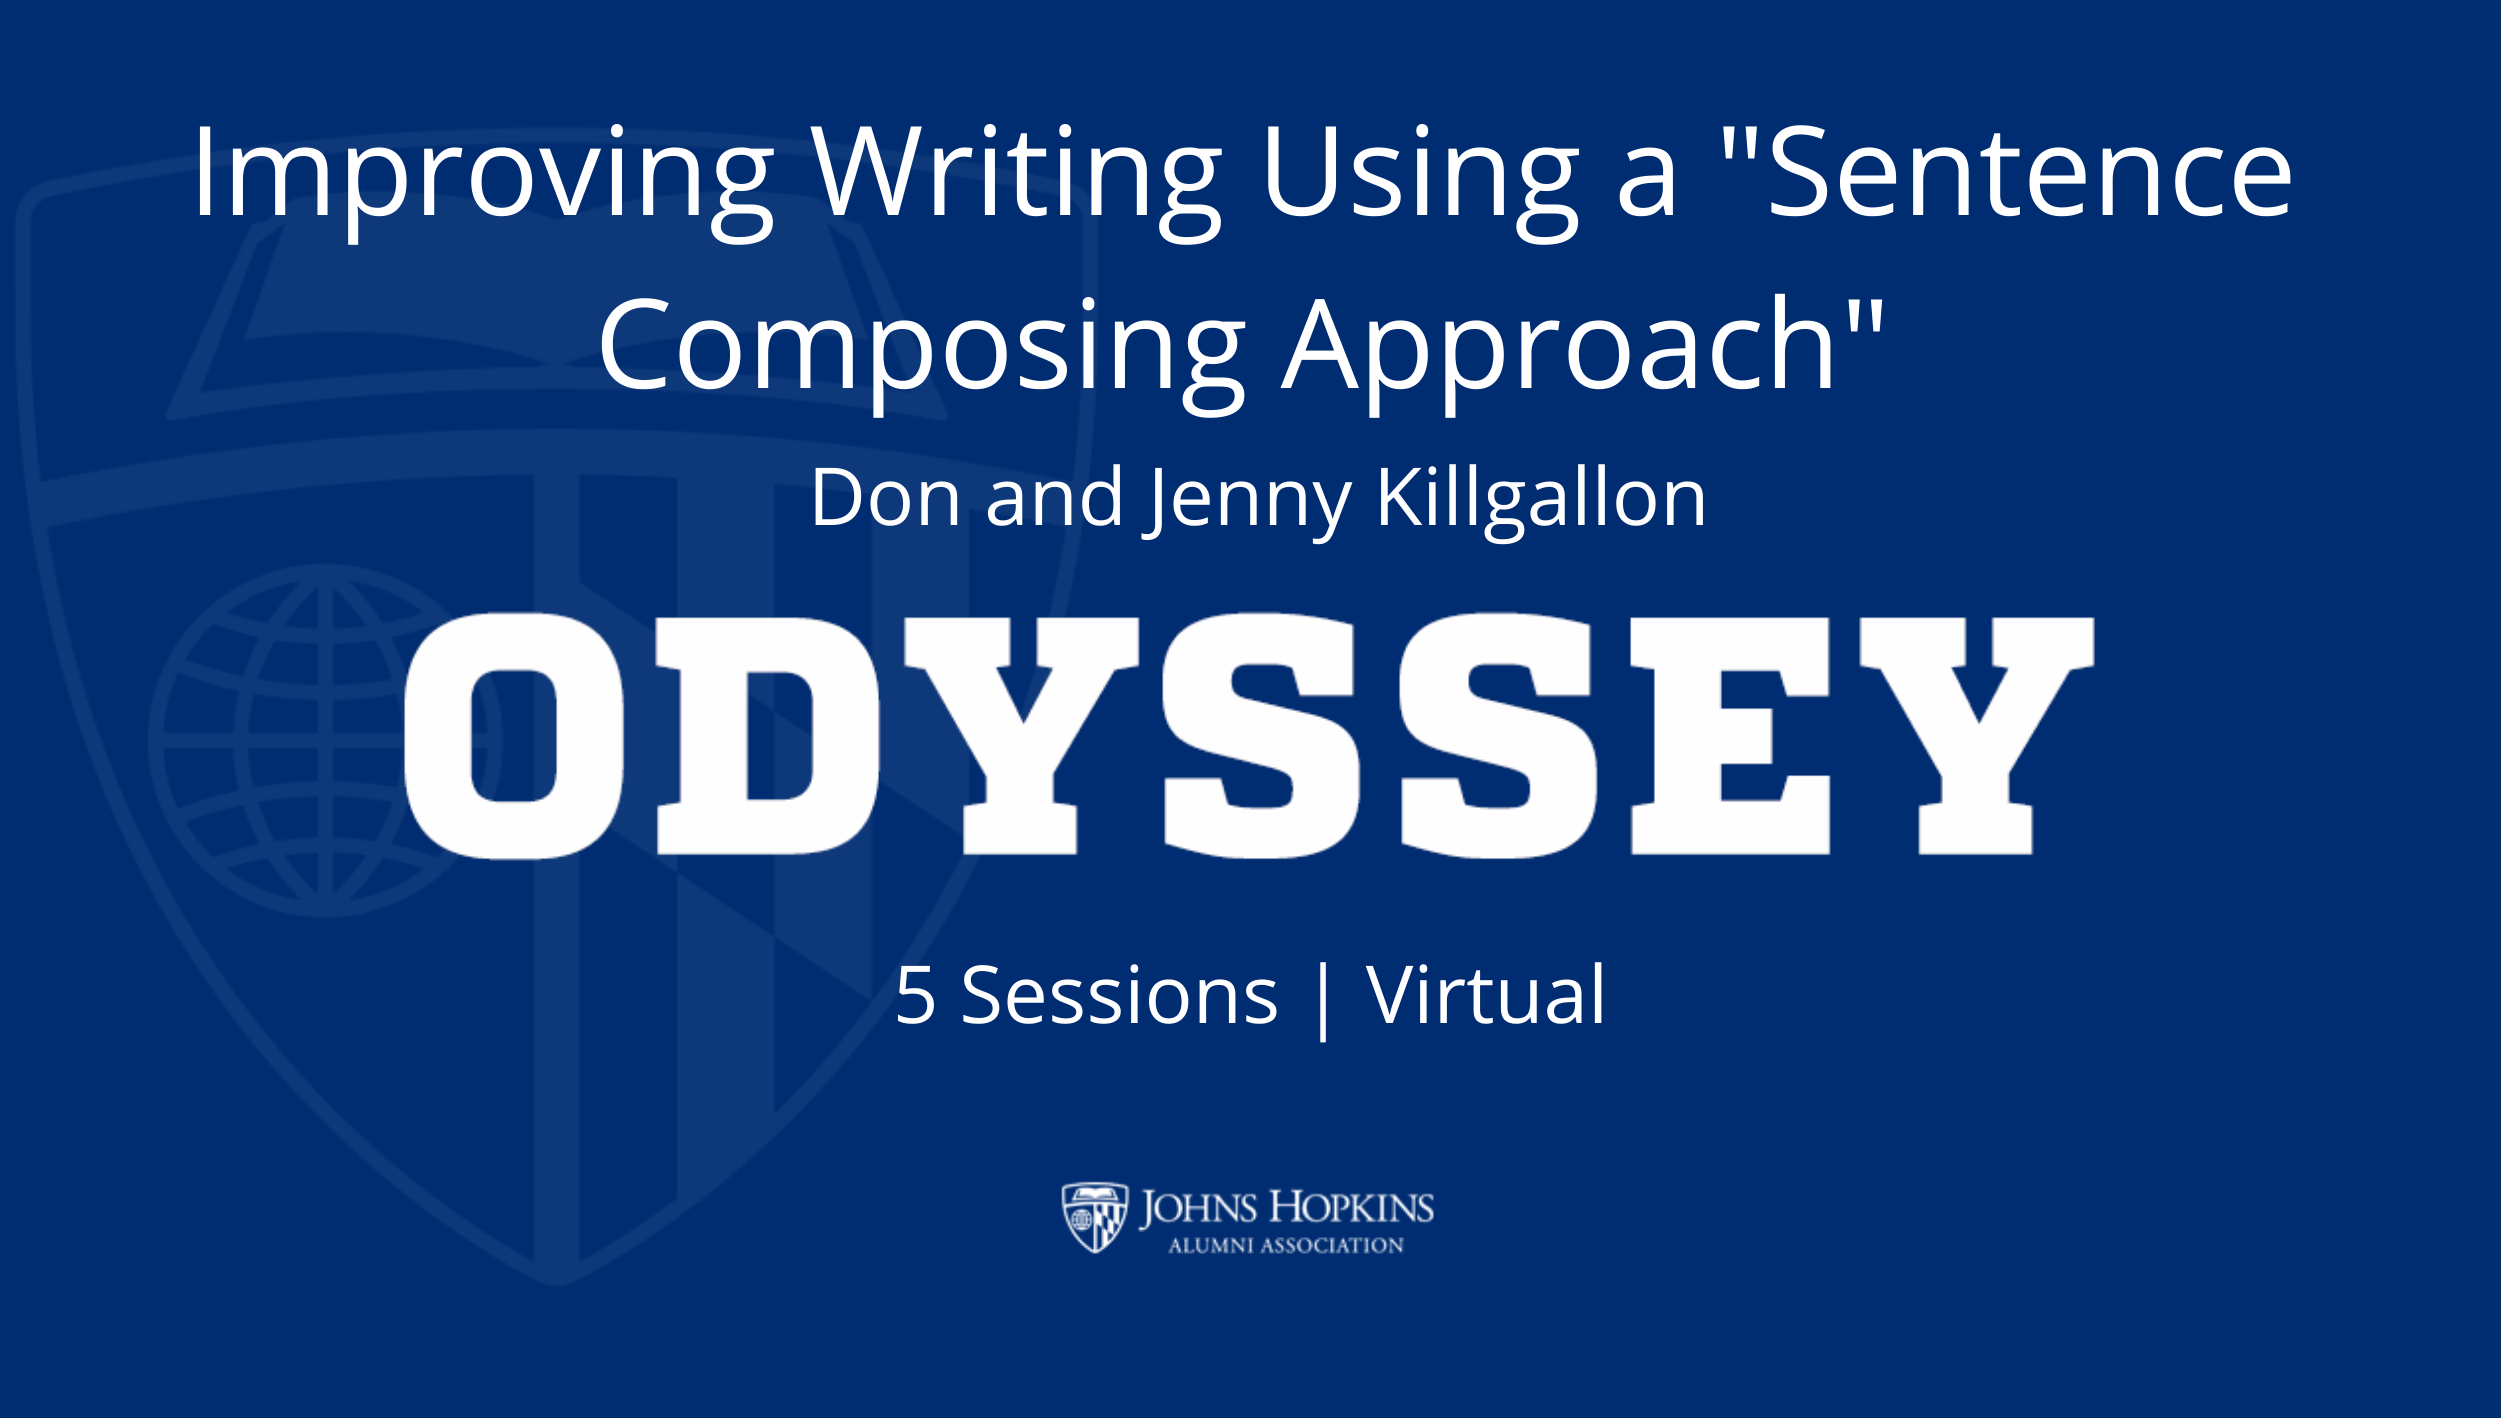 Improving Writing Using a “Sentence Composing Approach” 